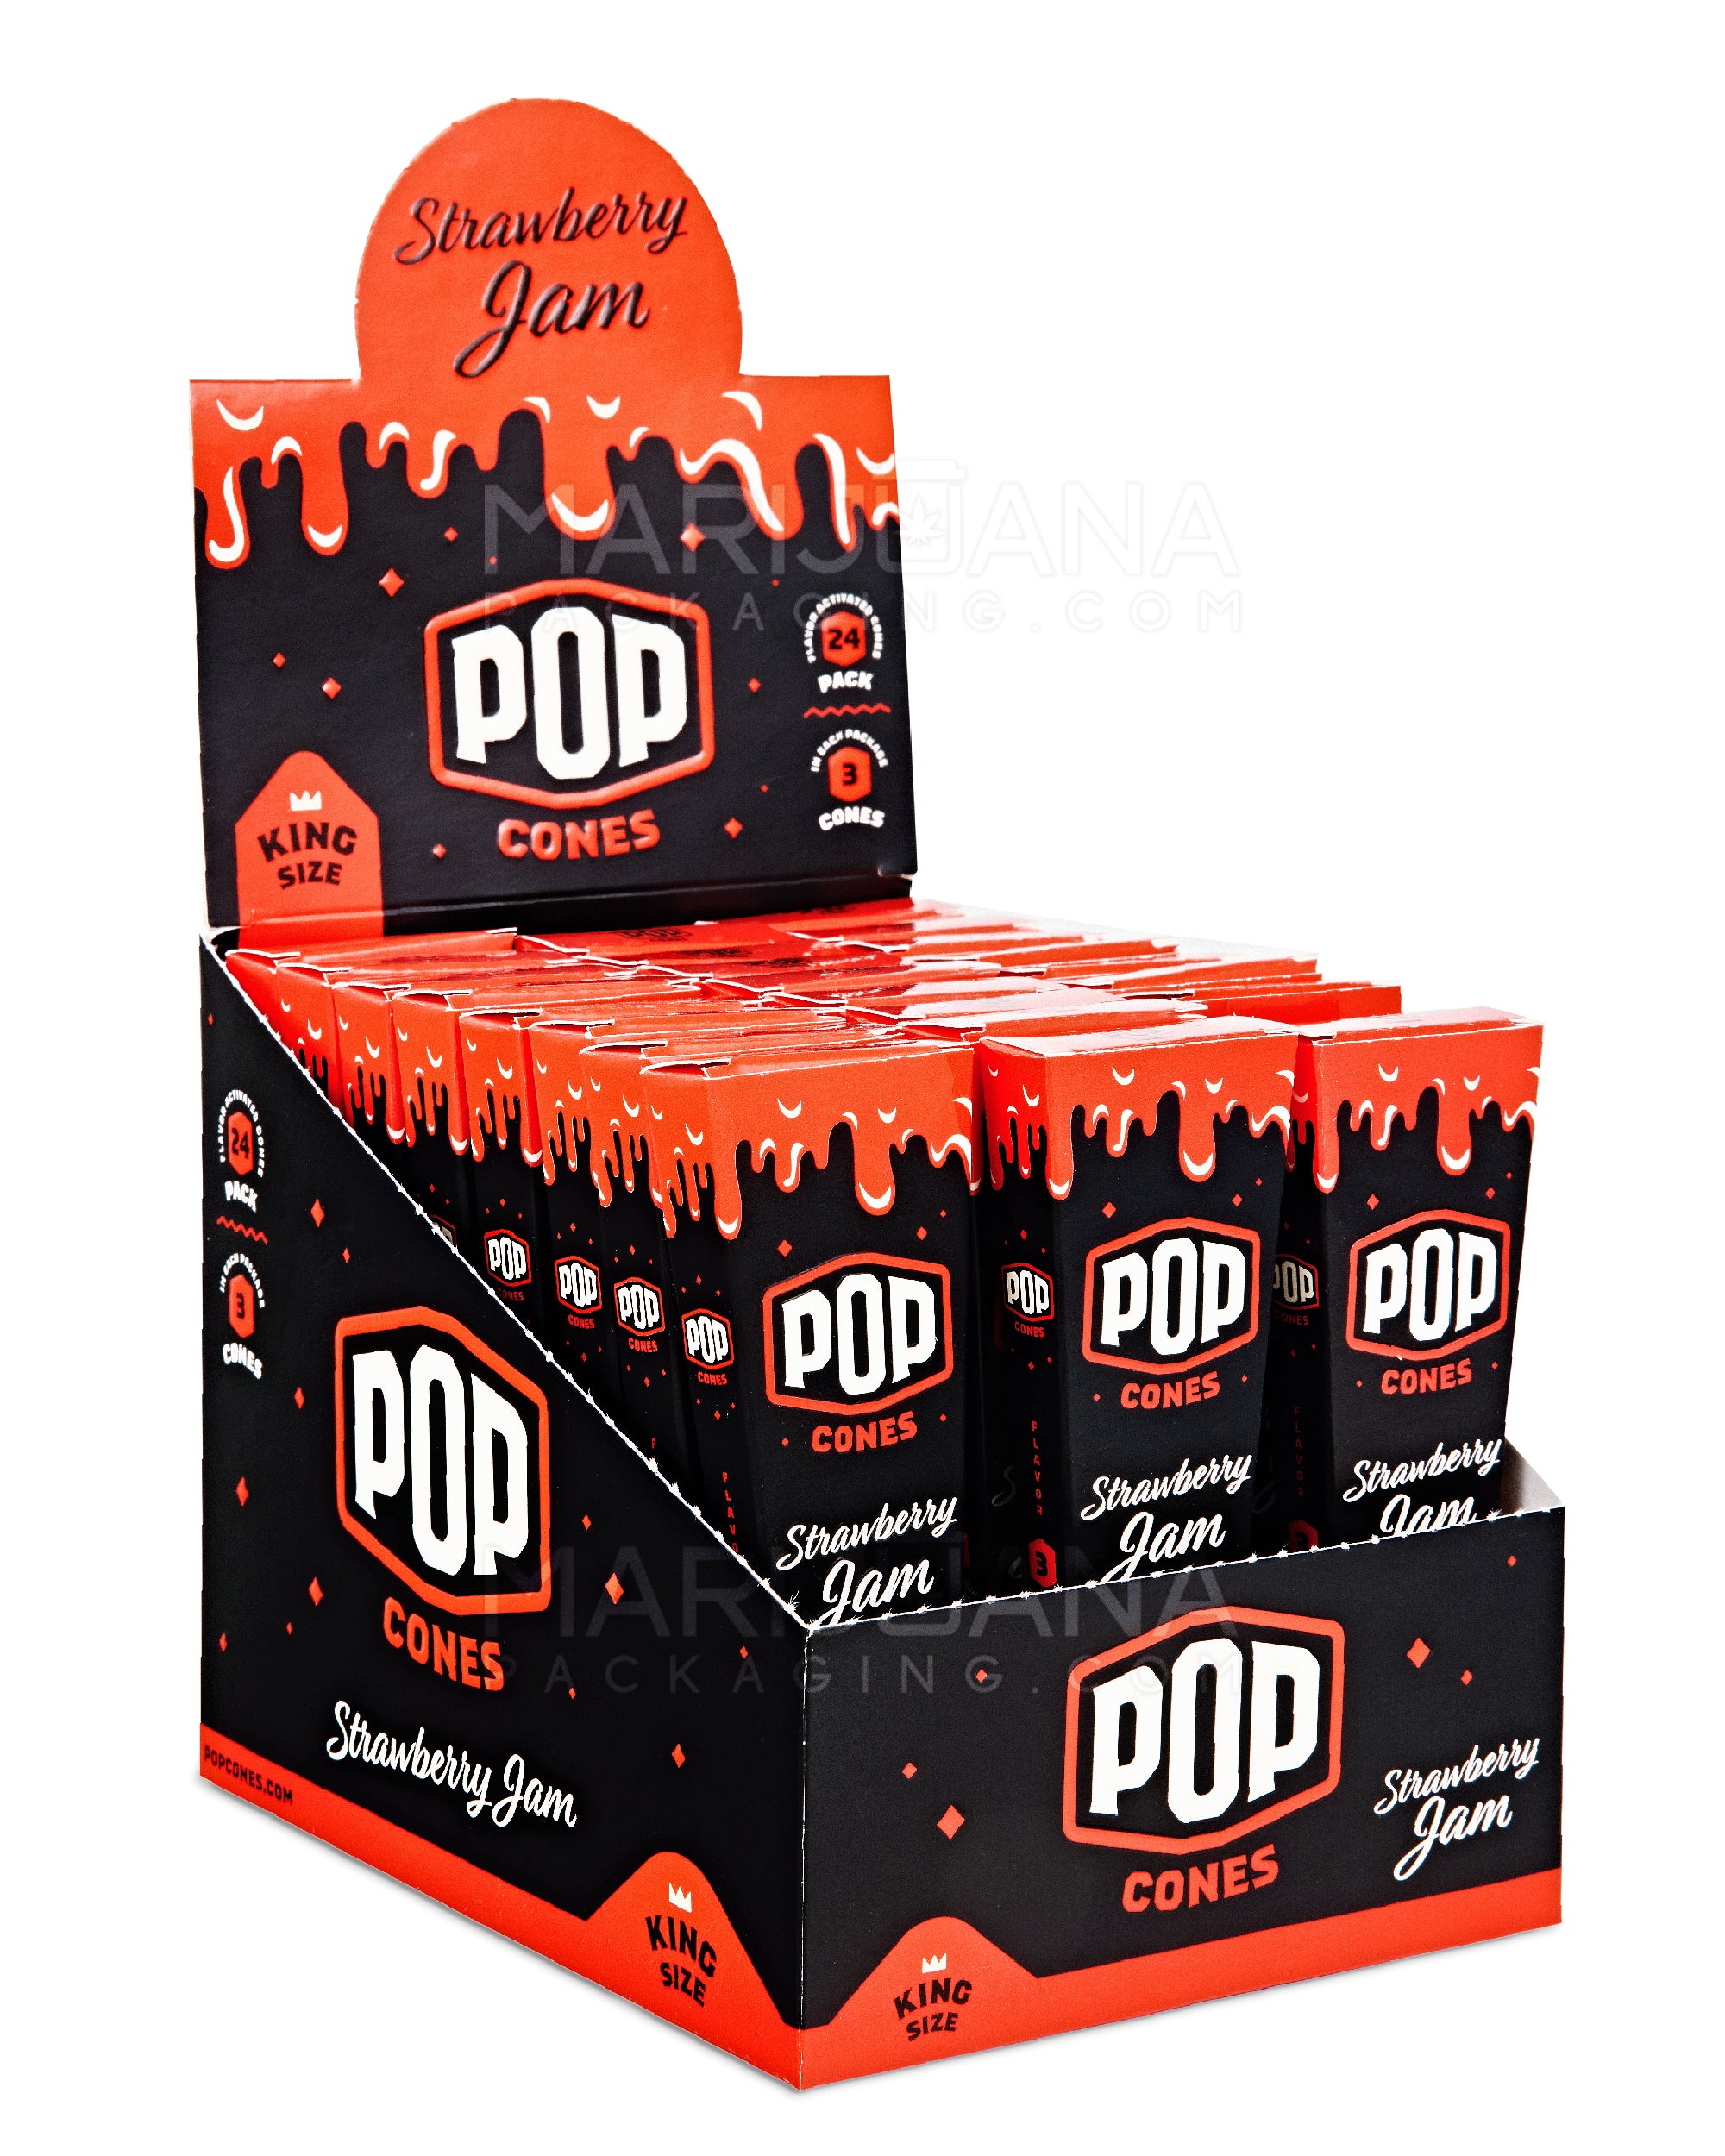 POP CONES | 'Retail Display' King Size Pre-Rolled Cones | 109mm - Strawberry Jam - 24 Count - 1